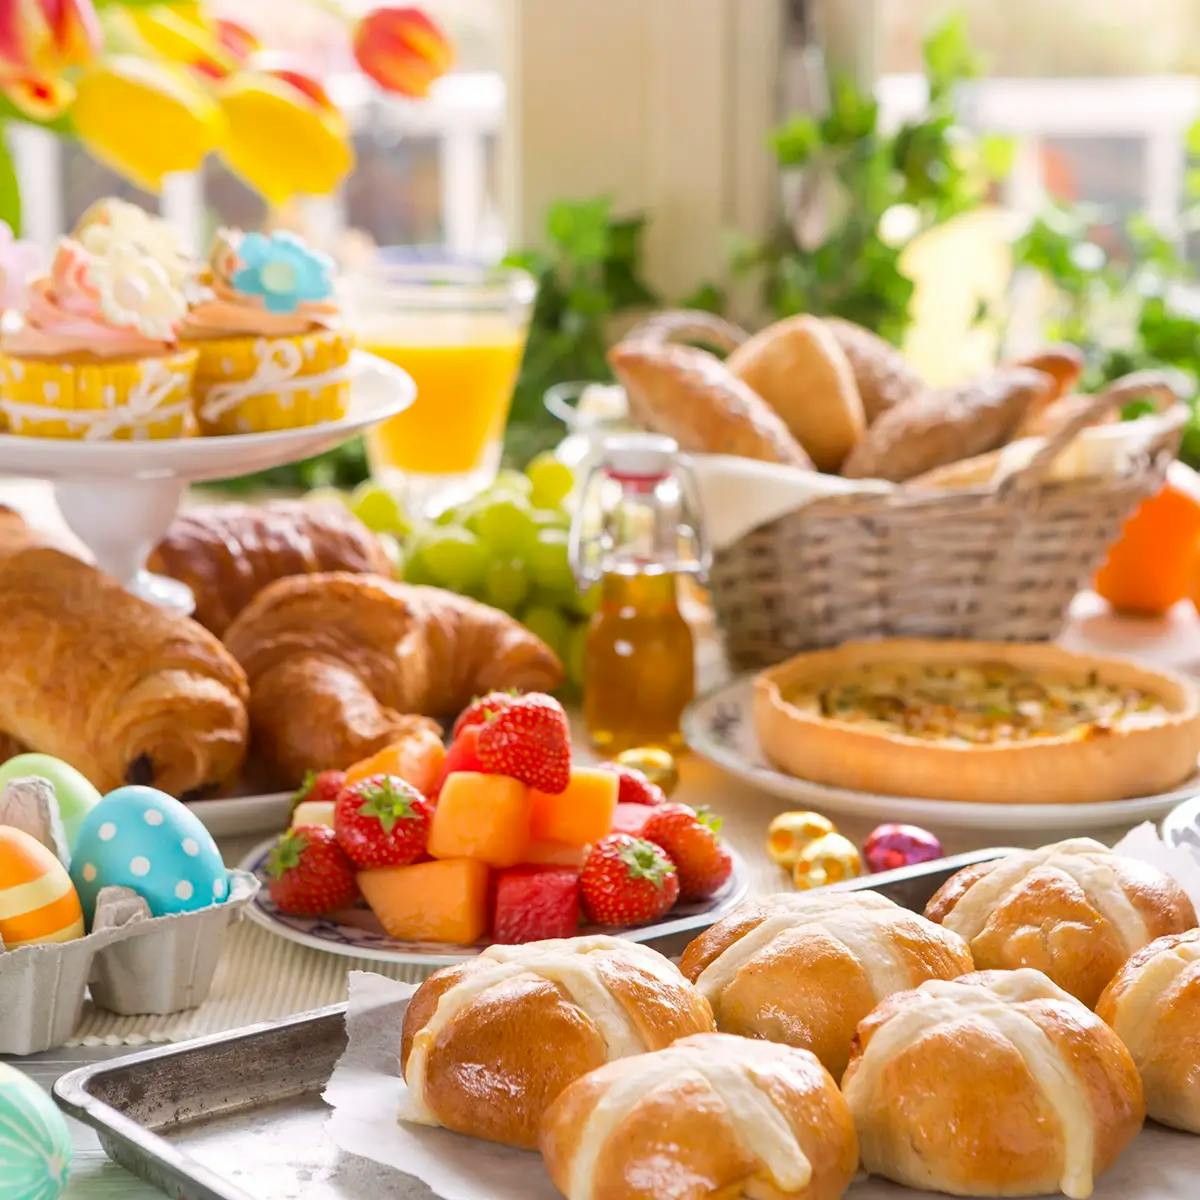 Spring table set for Easter brunch with fruit, croissants, and hot cross buns